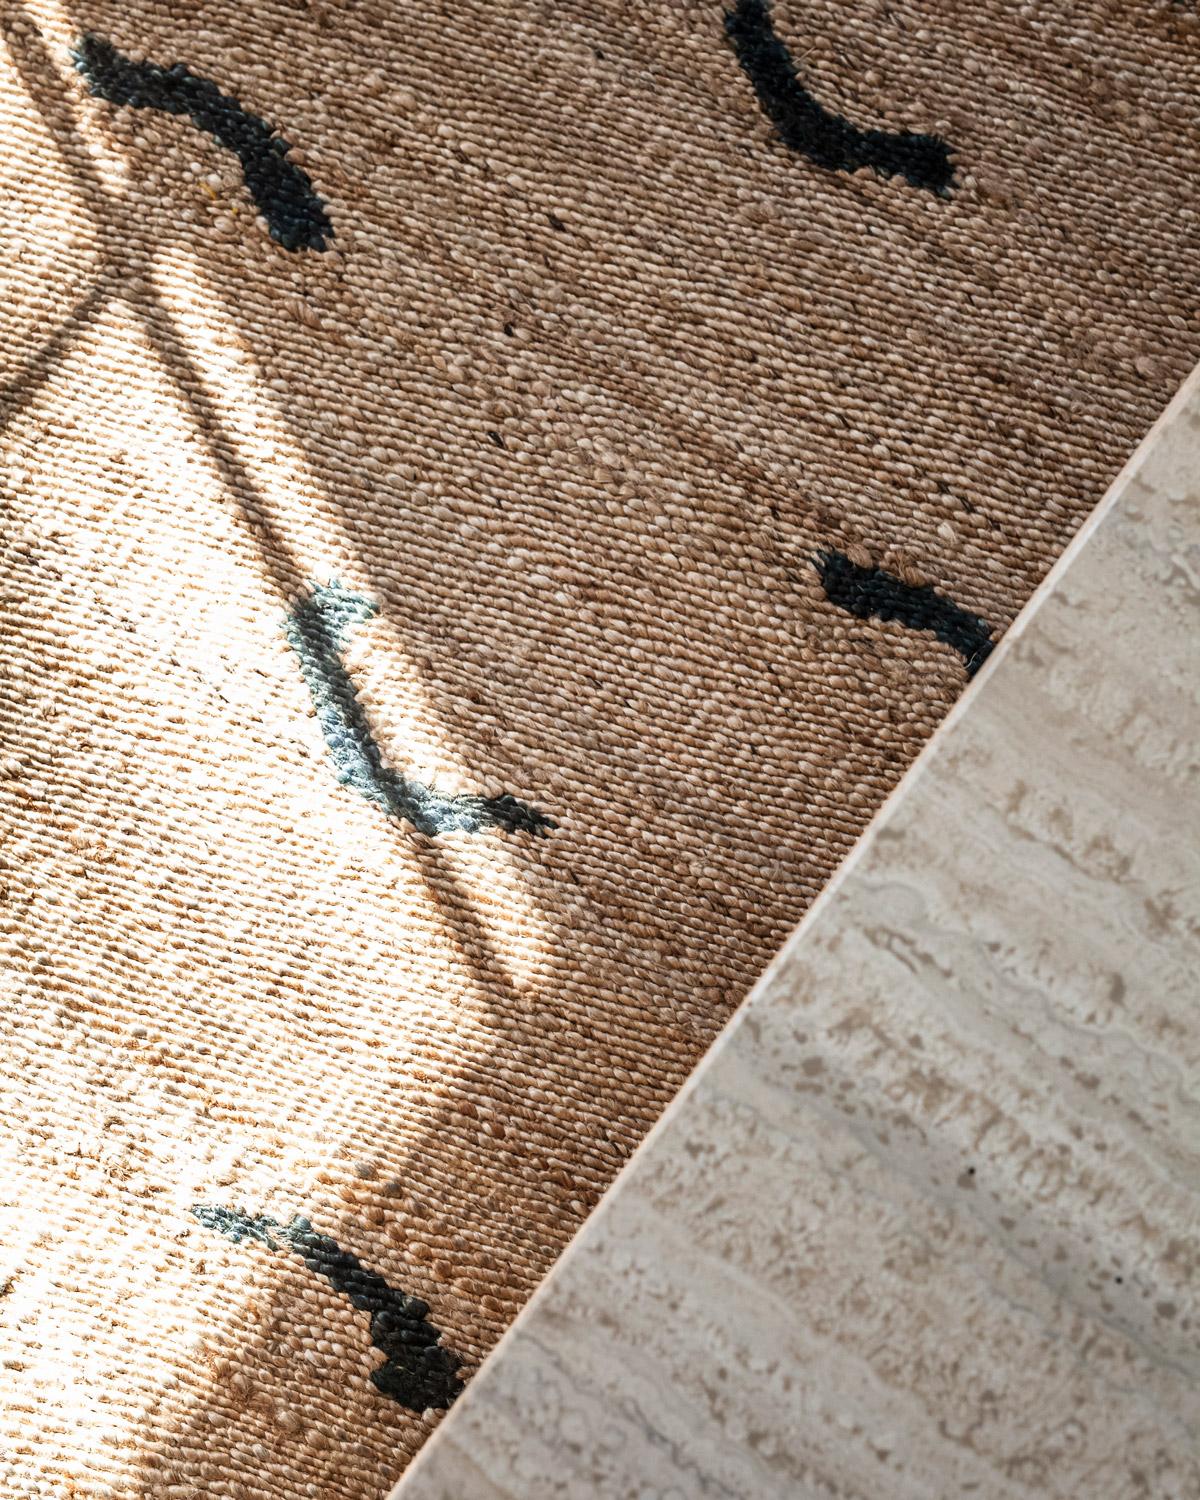 The Jute Collection is woven with strong all-natural plant fibers in a modern rustic design. Equally as rugged as Minimalist. Available in three different patterns using our signature cream, teal, and black colors as accents. The rugs are a